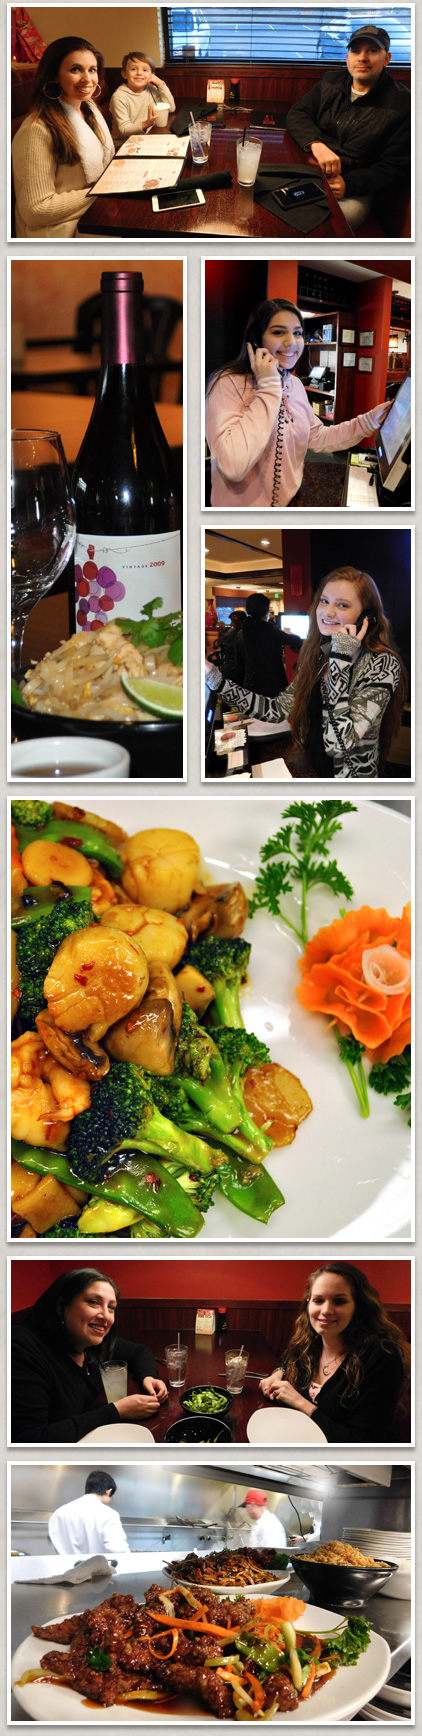 Chen Chinese Cuisine in Lake In The Hills photos part 1